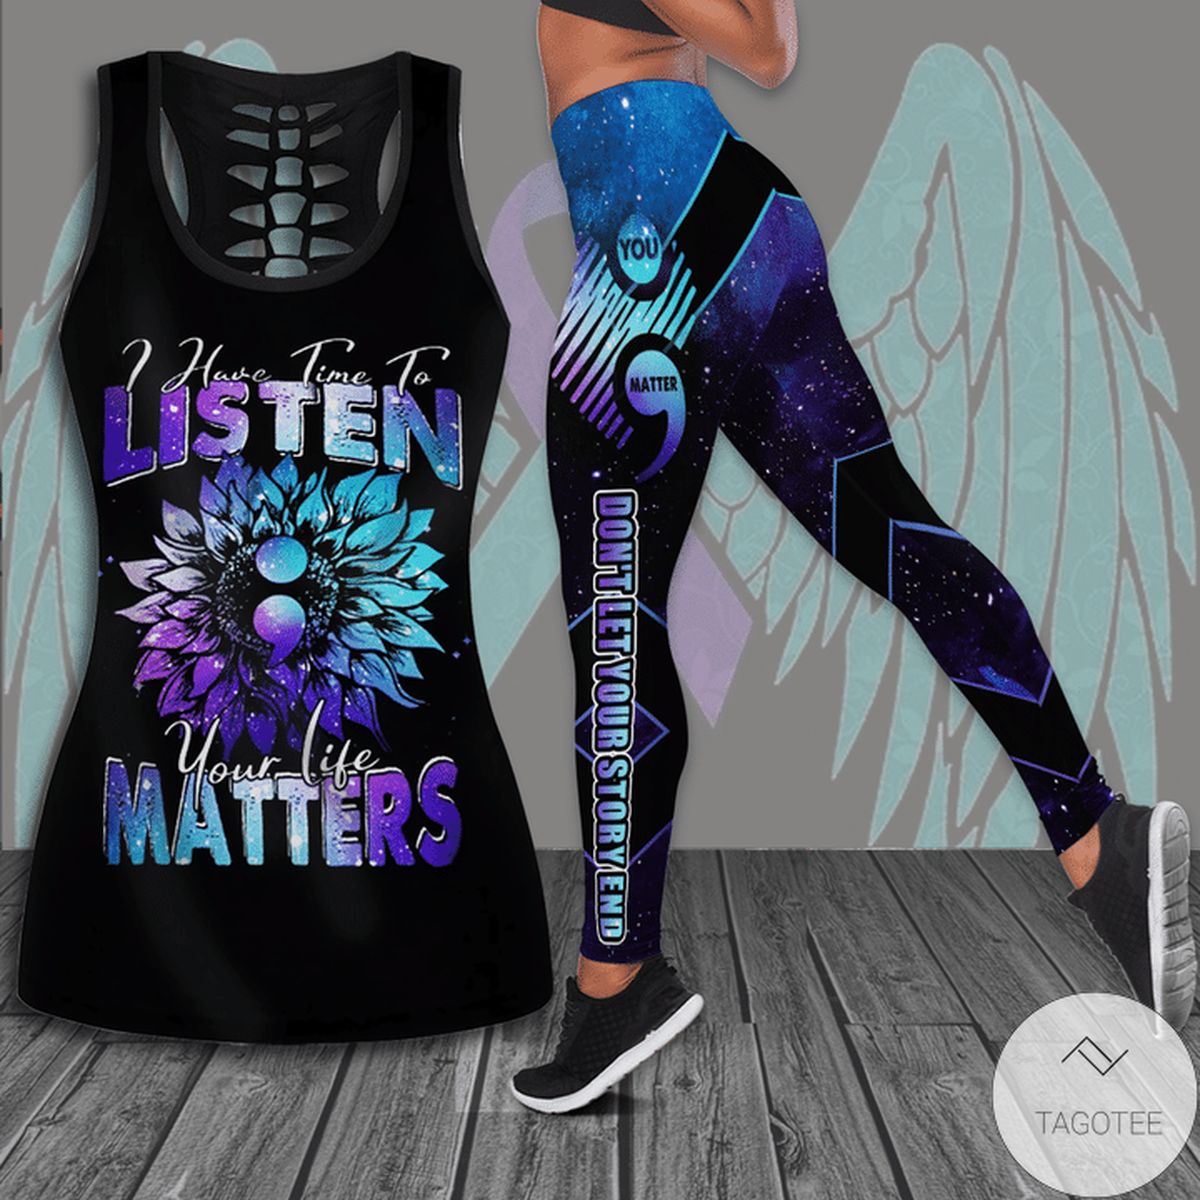 Suicide Prevention Awareness I Have Time To Listen Your Life Matters Hollow Tank Top & Leggings Set